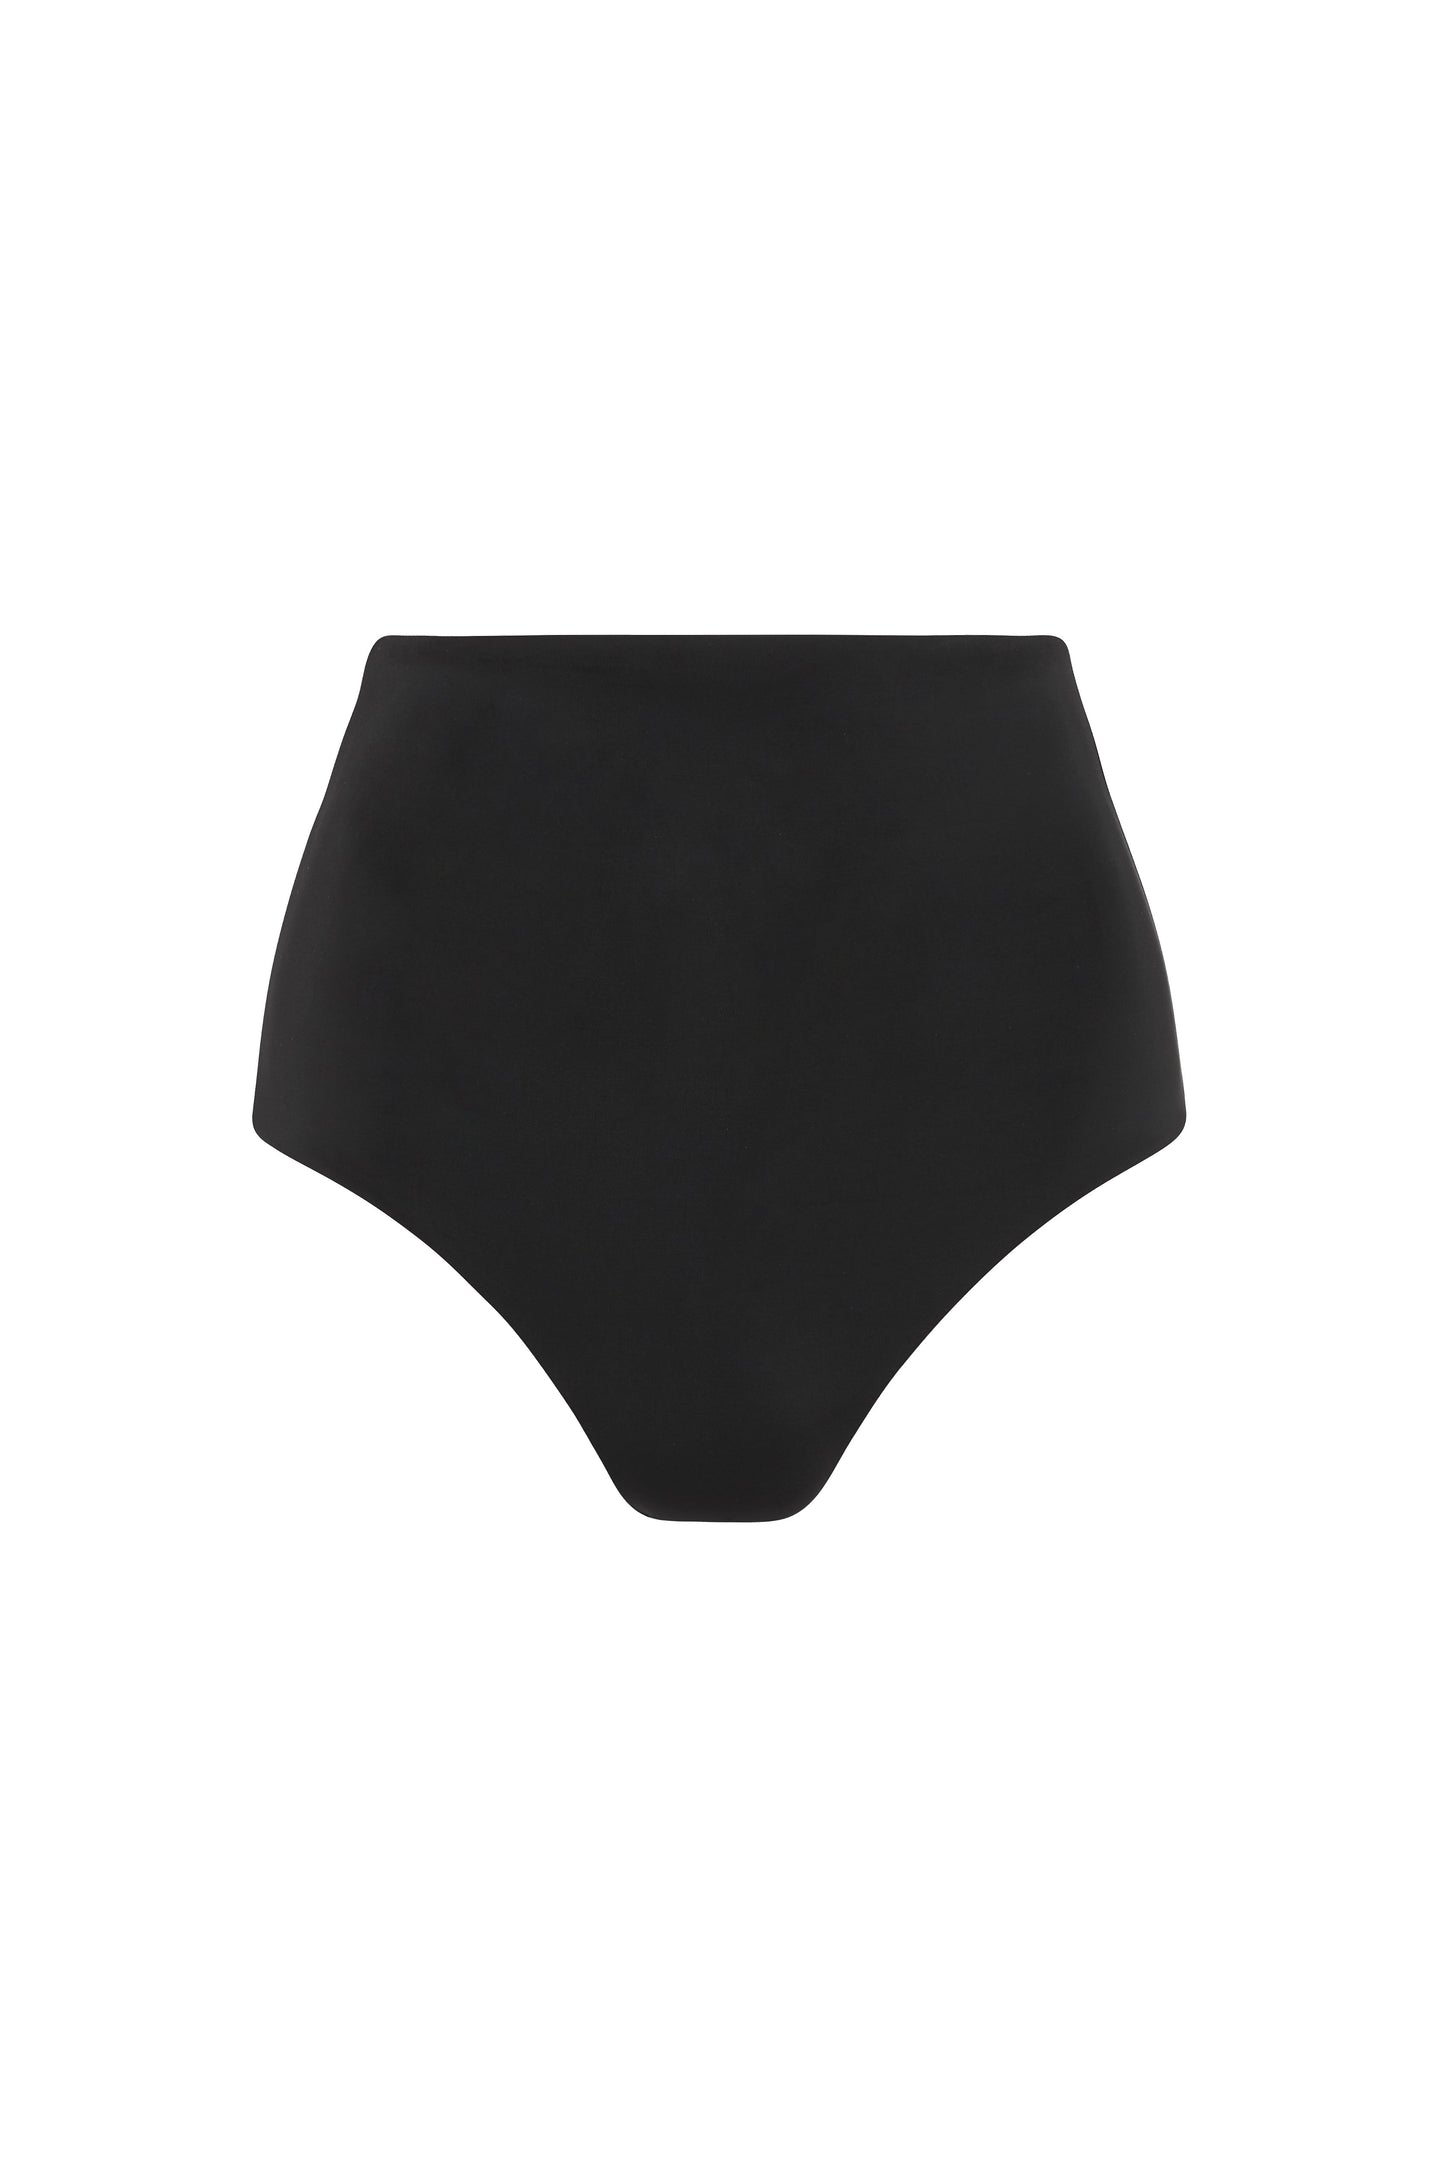 SIR the label Hendry Classic High Brief BLACK